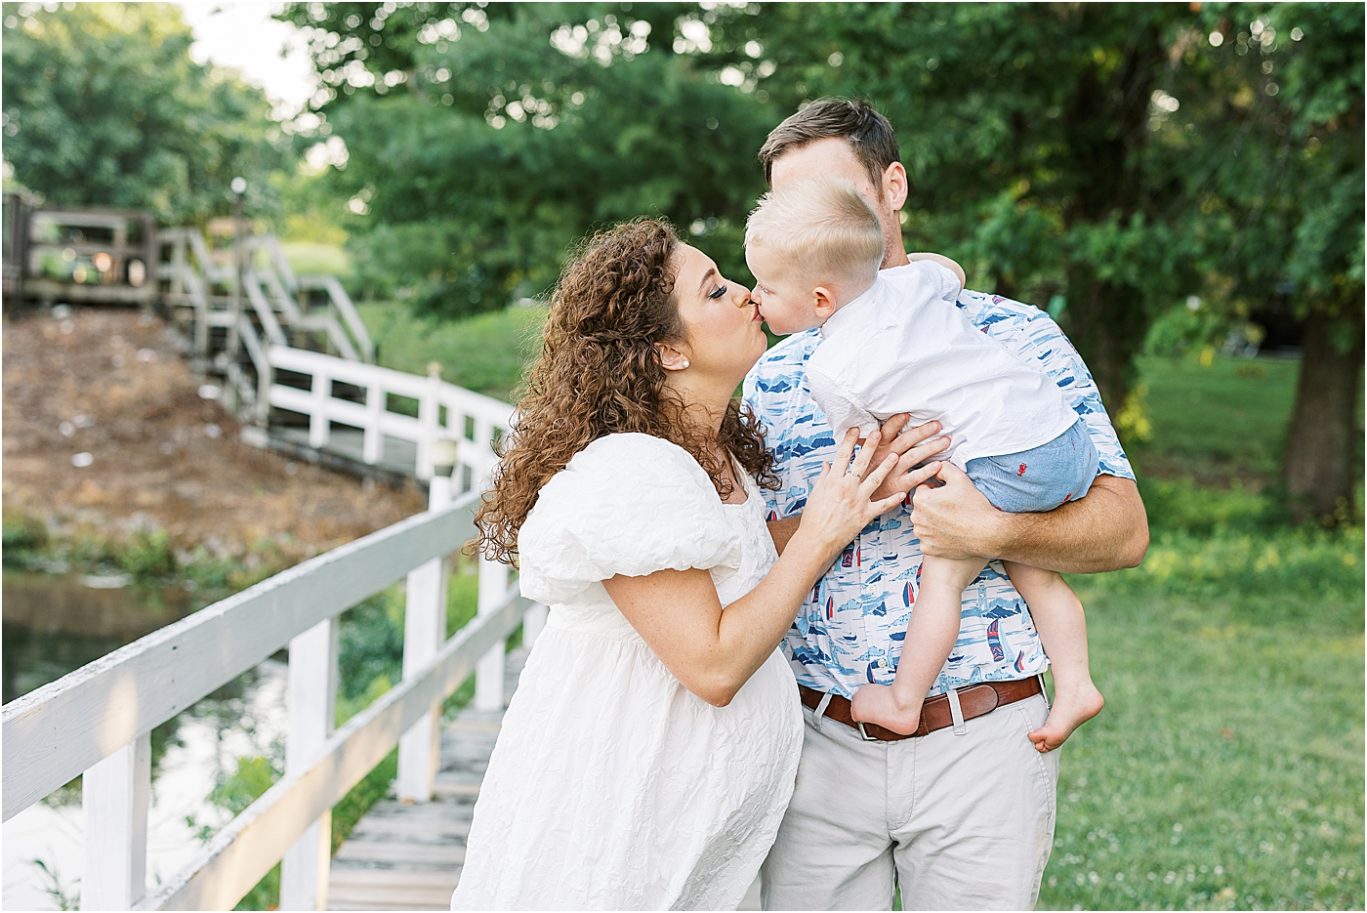 Toddler giving Mom a kiss during maternity photoshoot with Lindsay Konopa Photography.